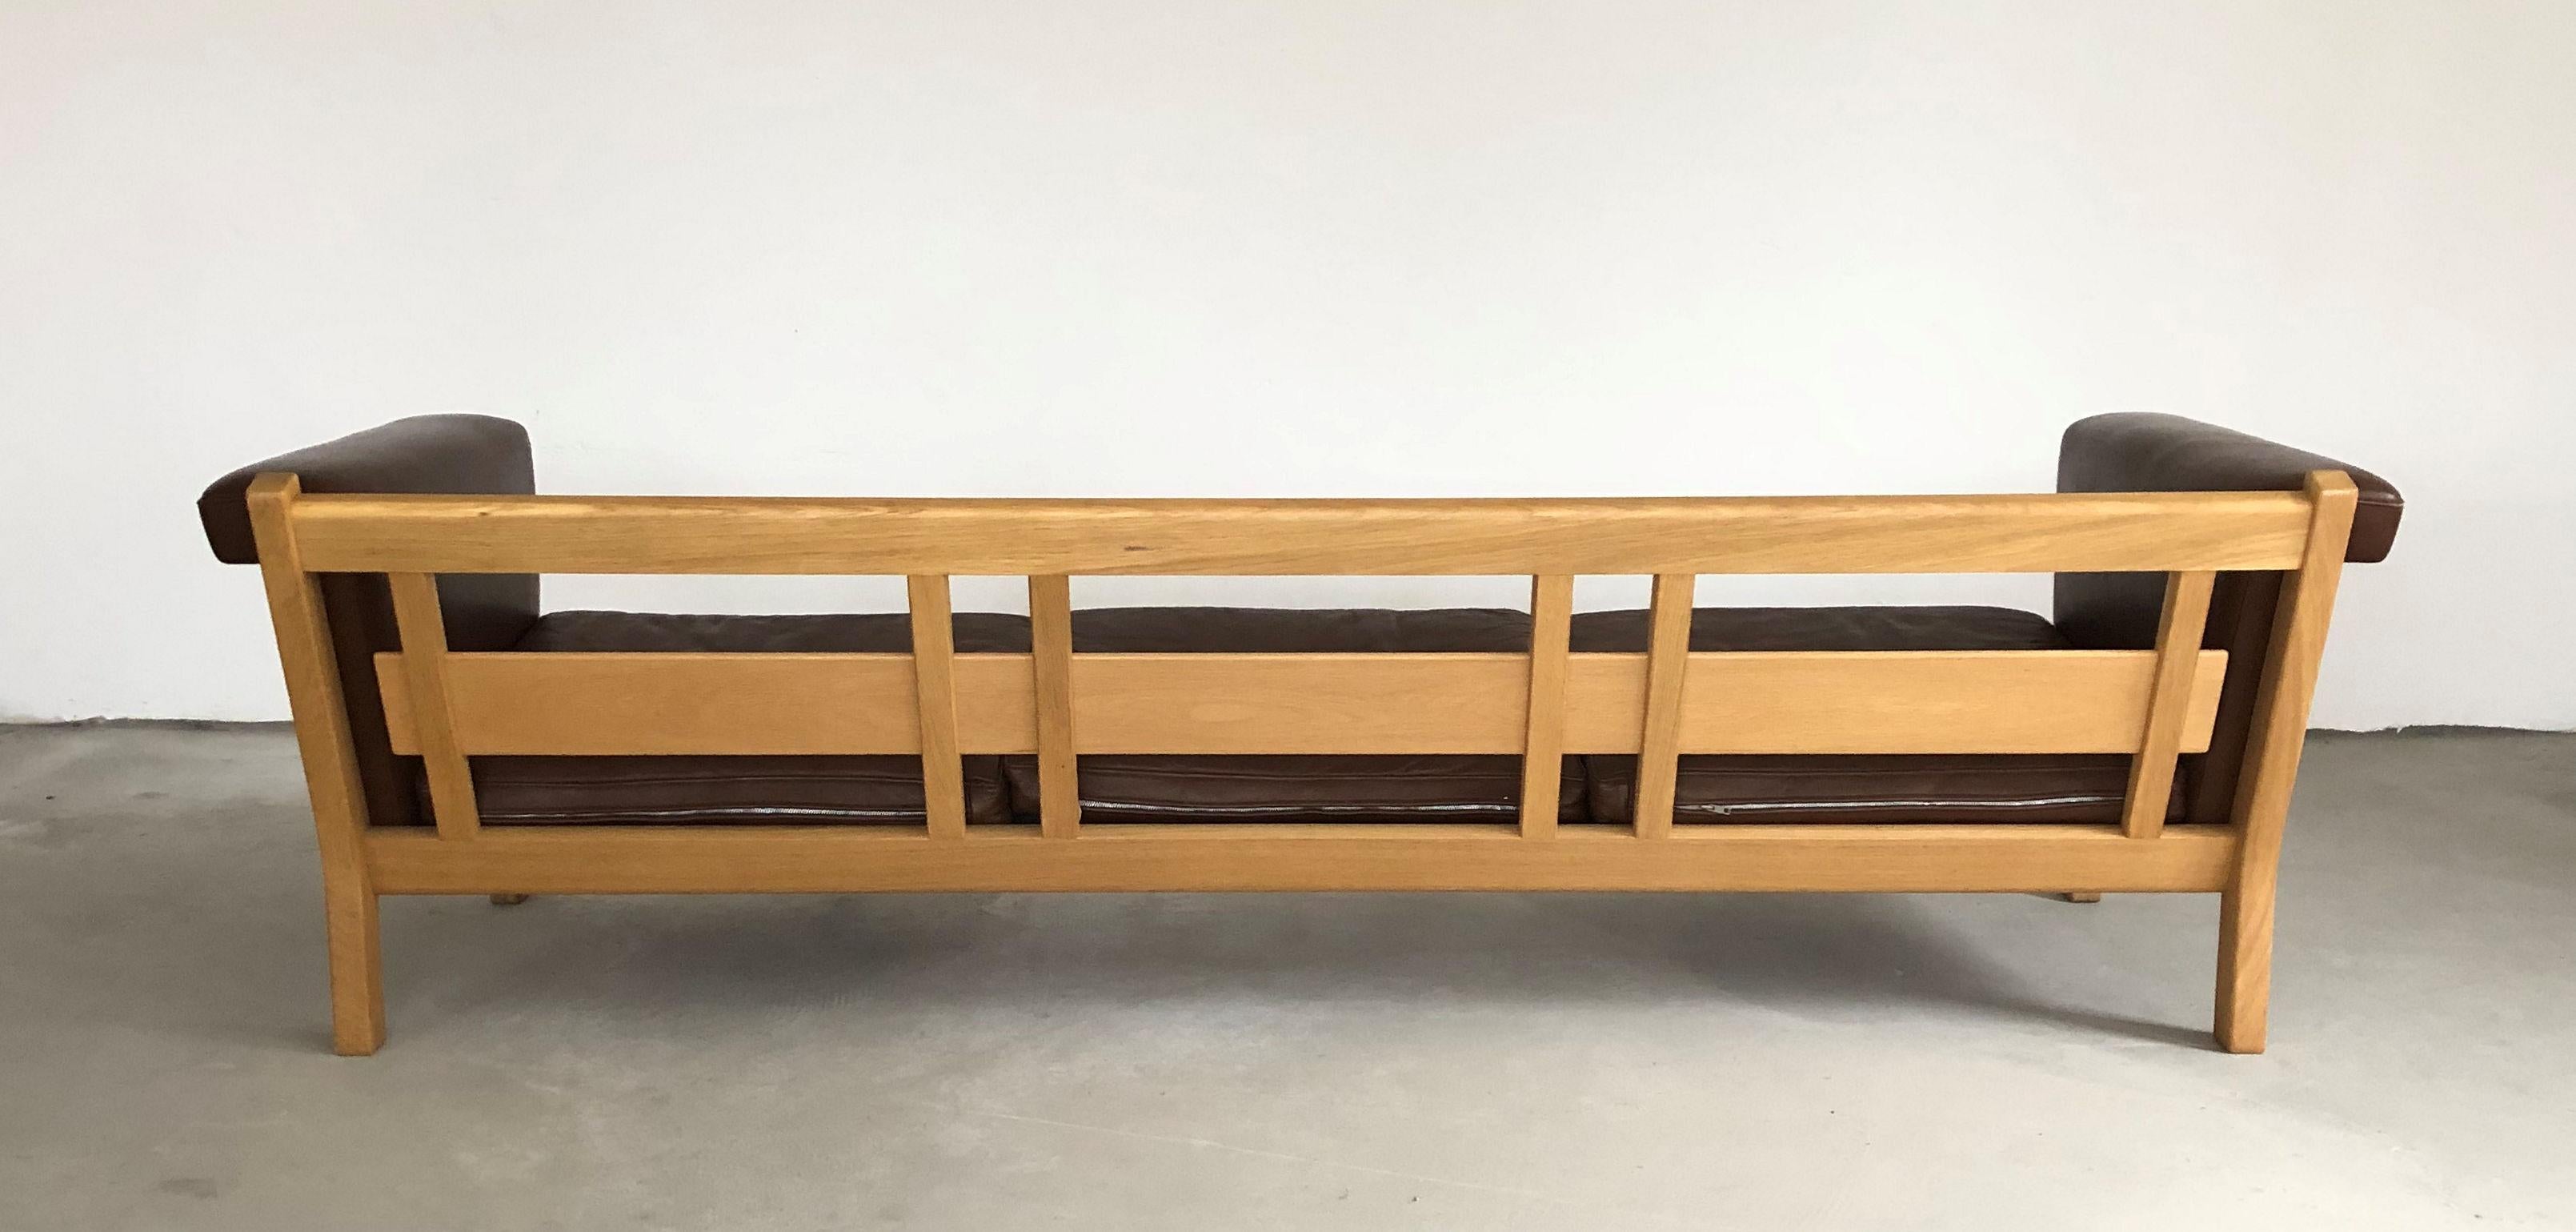 1960s Danish Hans J. Wegner Three-Seat Sofa in Oak and Brown Leather by GETAMA In Good Condition For Sale In Knebel, DK